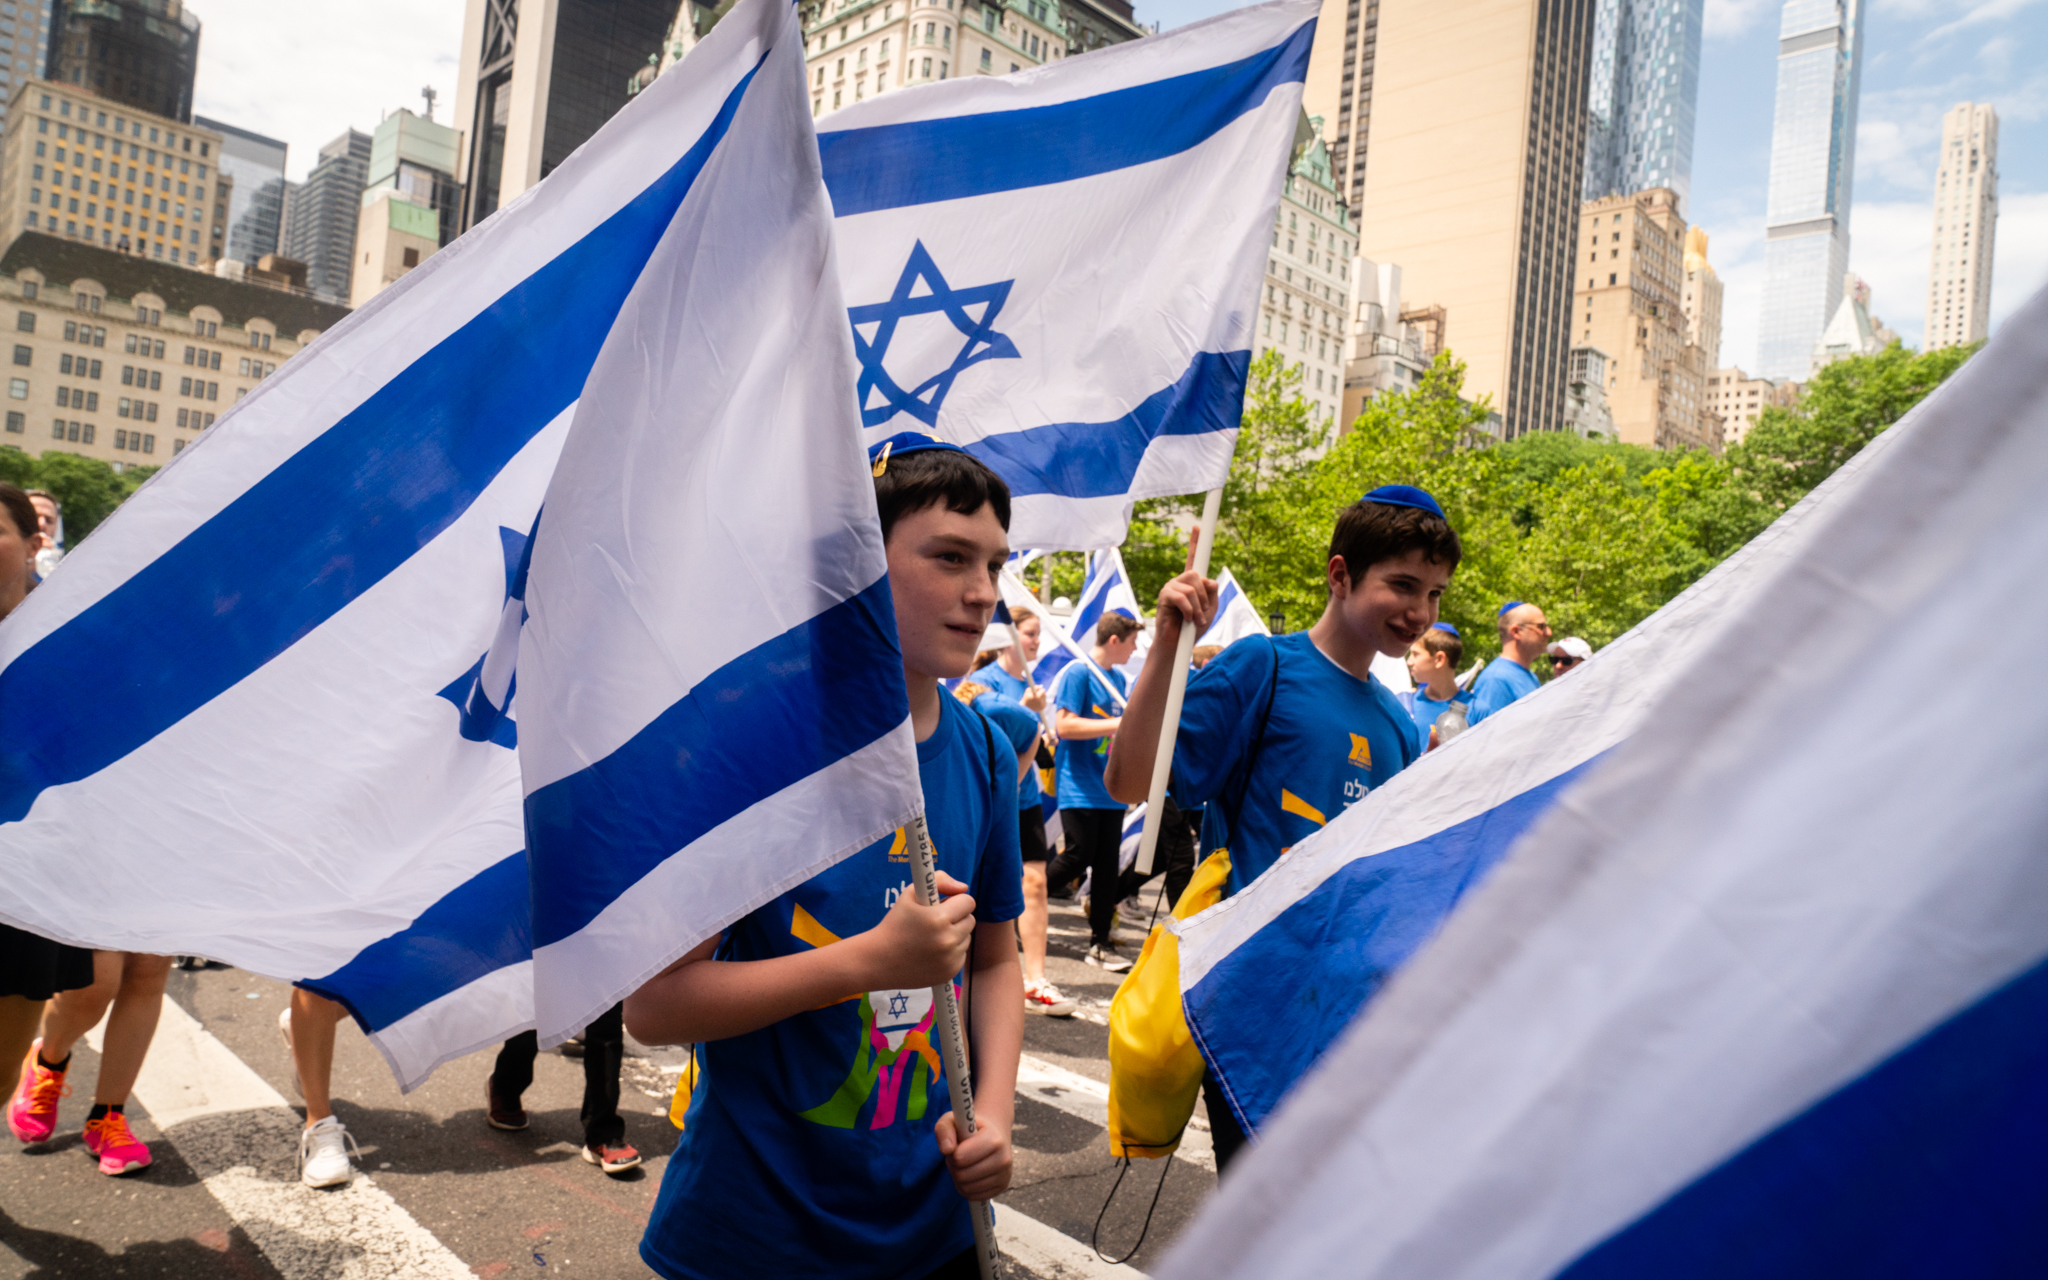 Tens of thousands march in New York's Israel parade in major show of